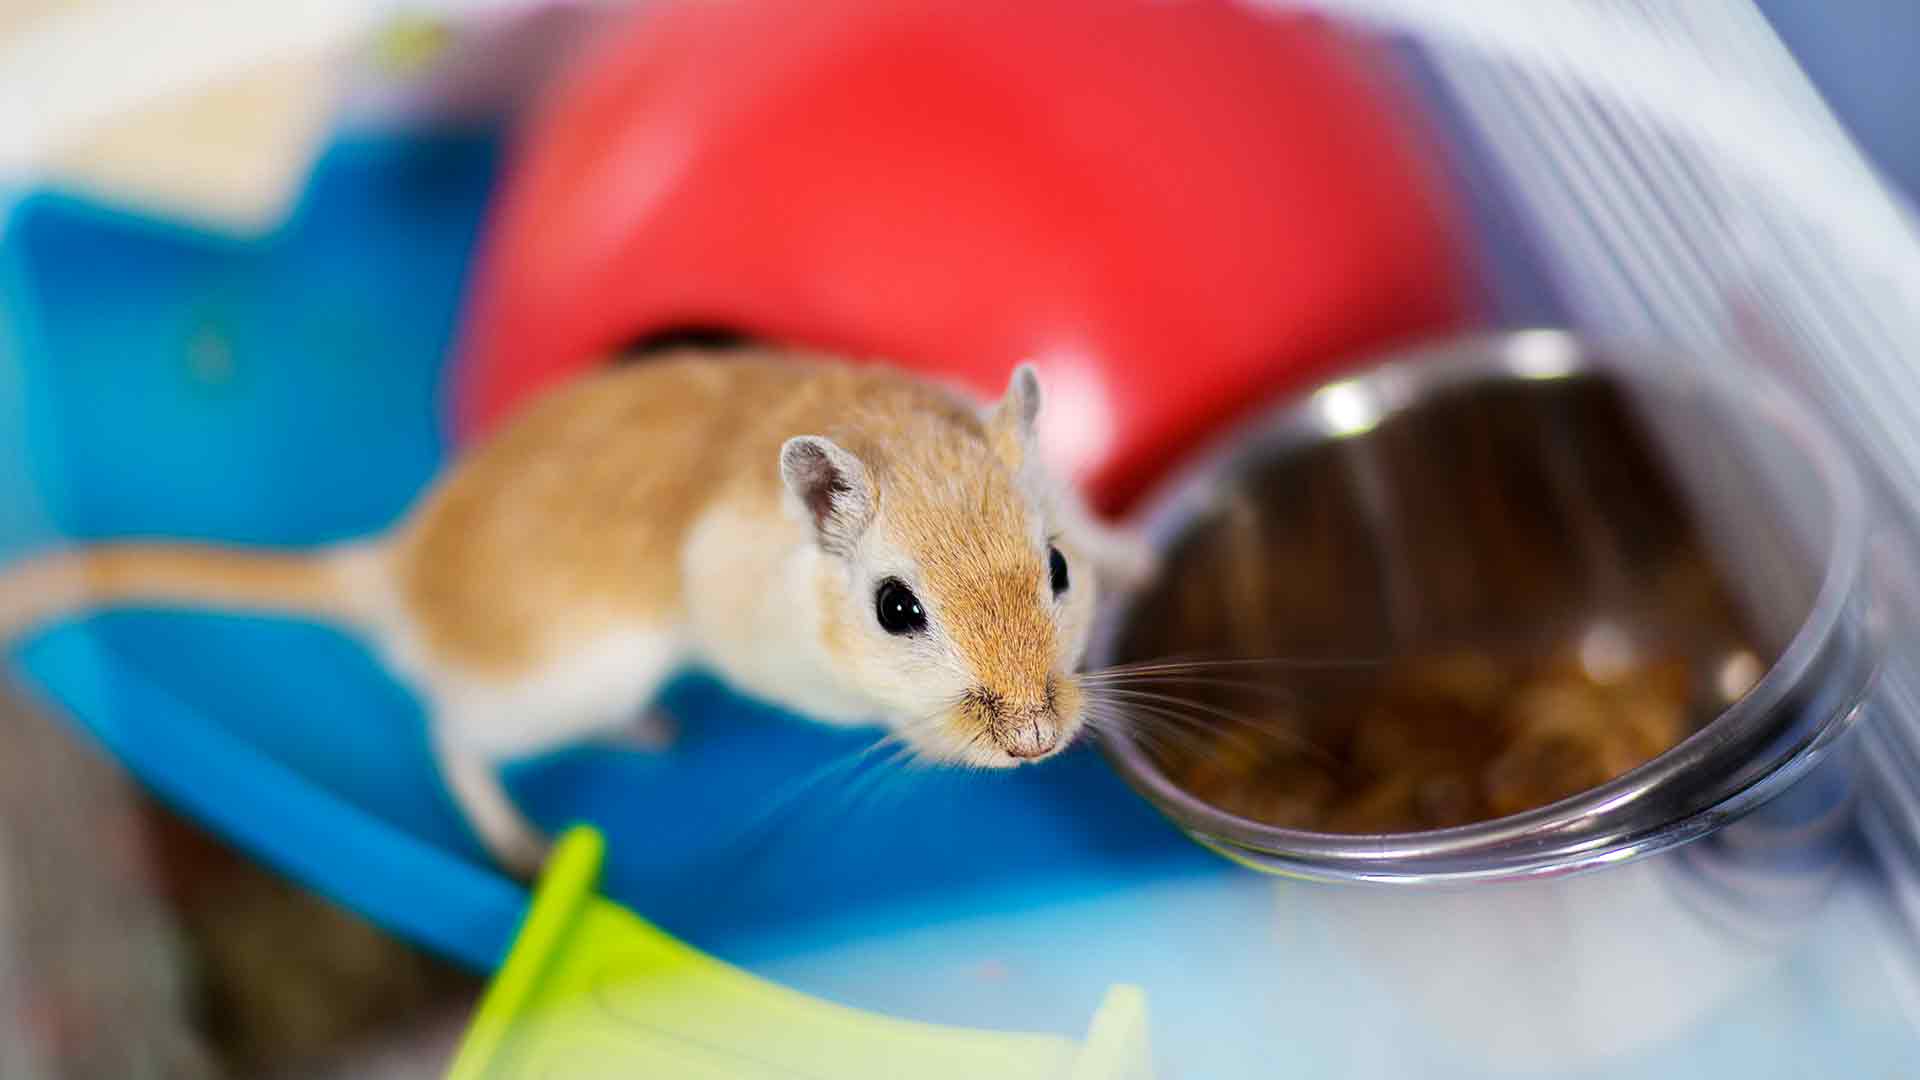 Gerbil Lifespan: How Long Do Gerbils Live As Pets And In The Wild?